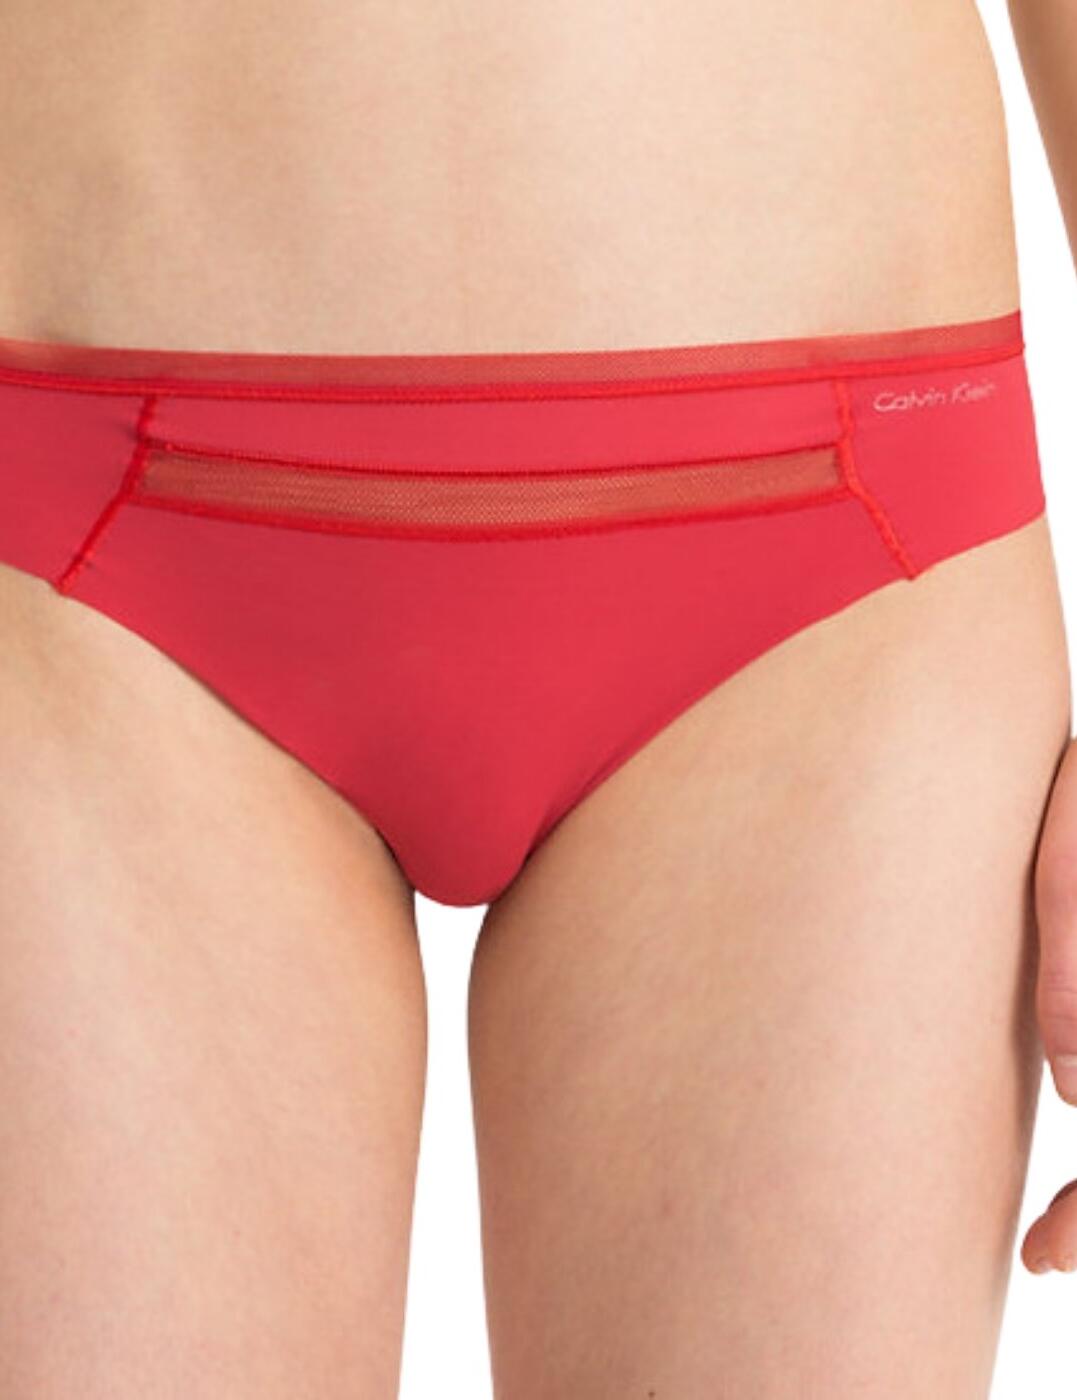 Calvin Klein Invisibles Thong in Manic Red